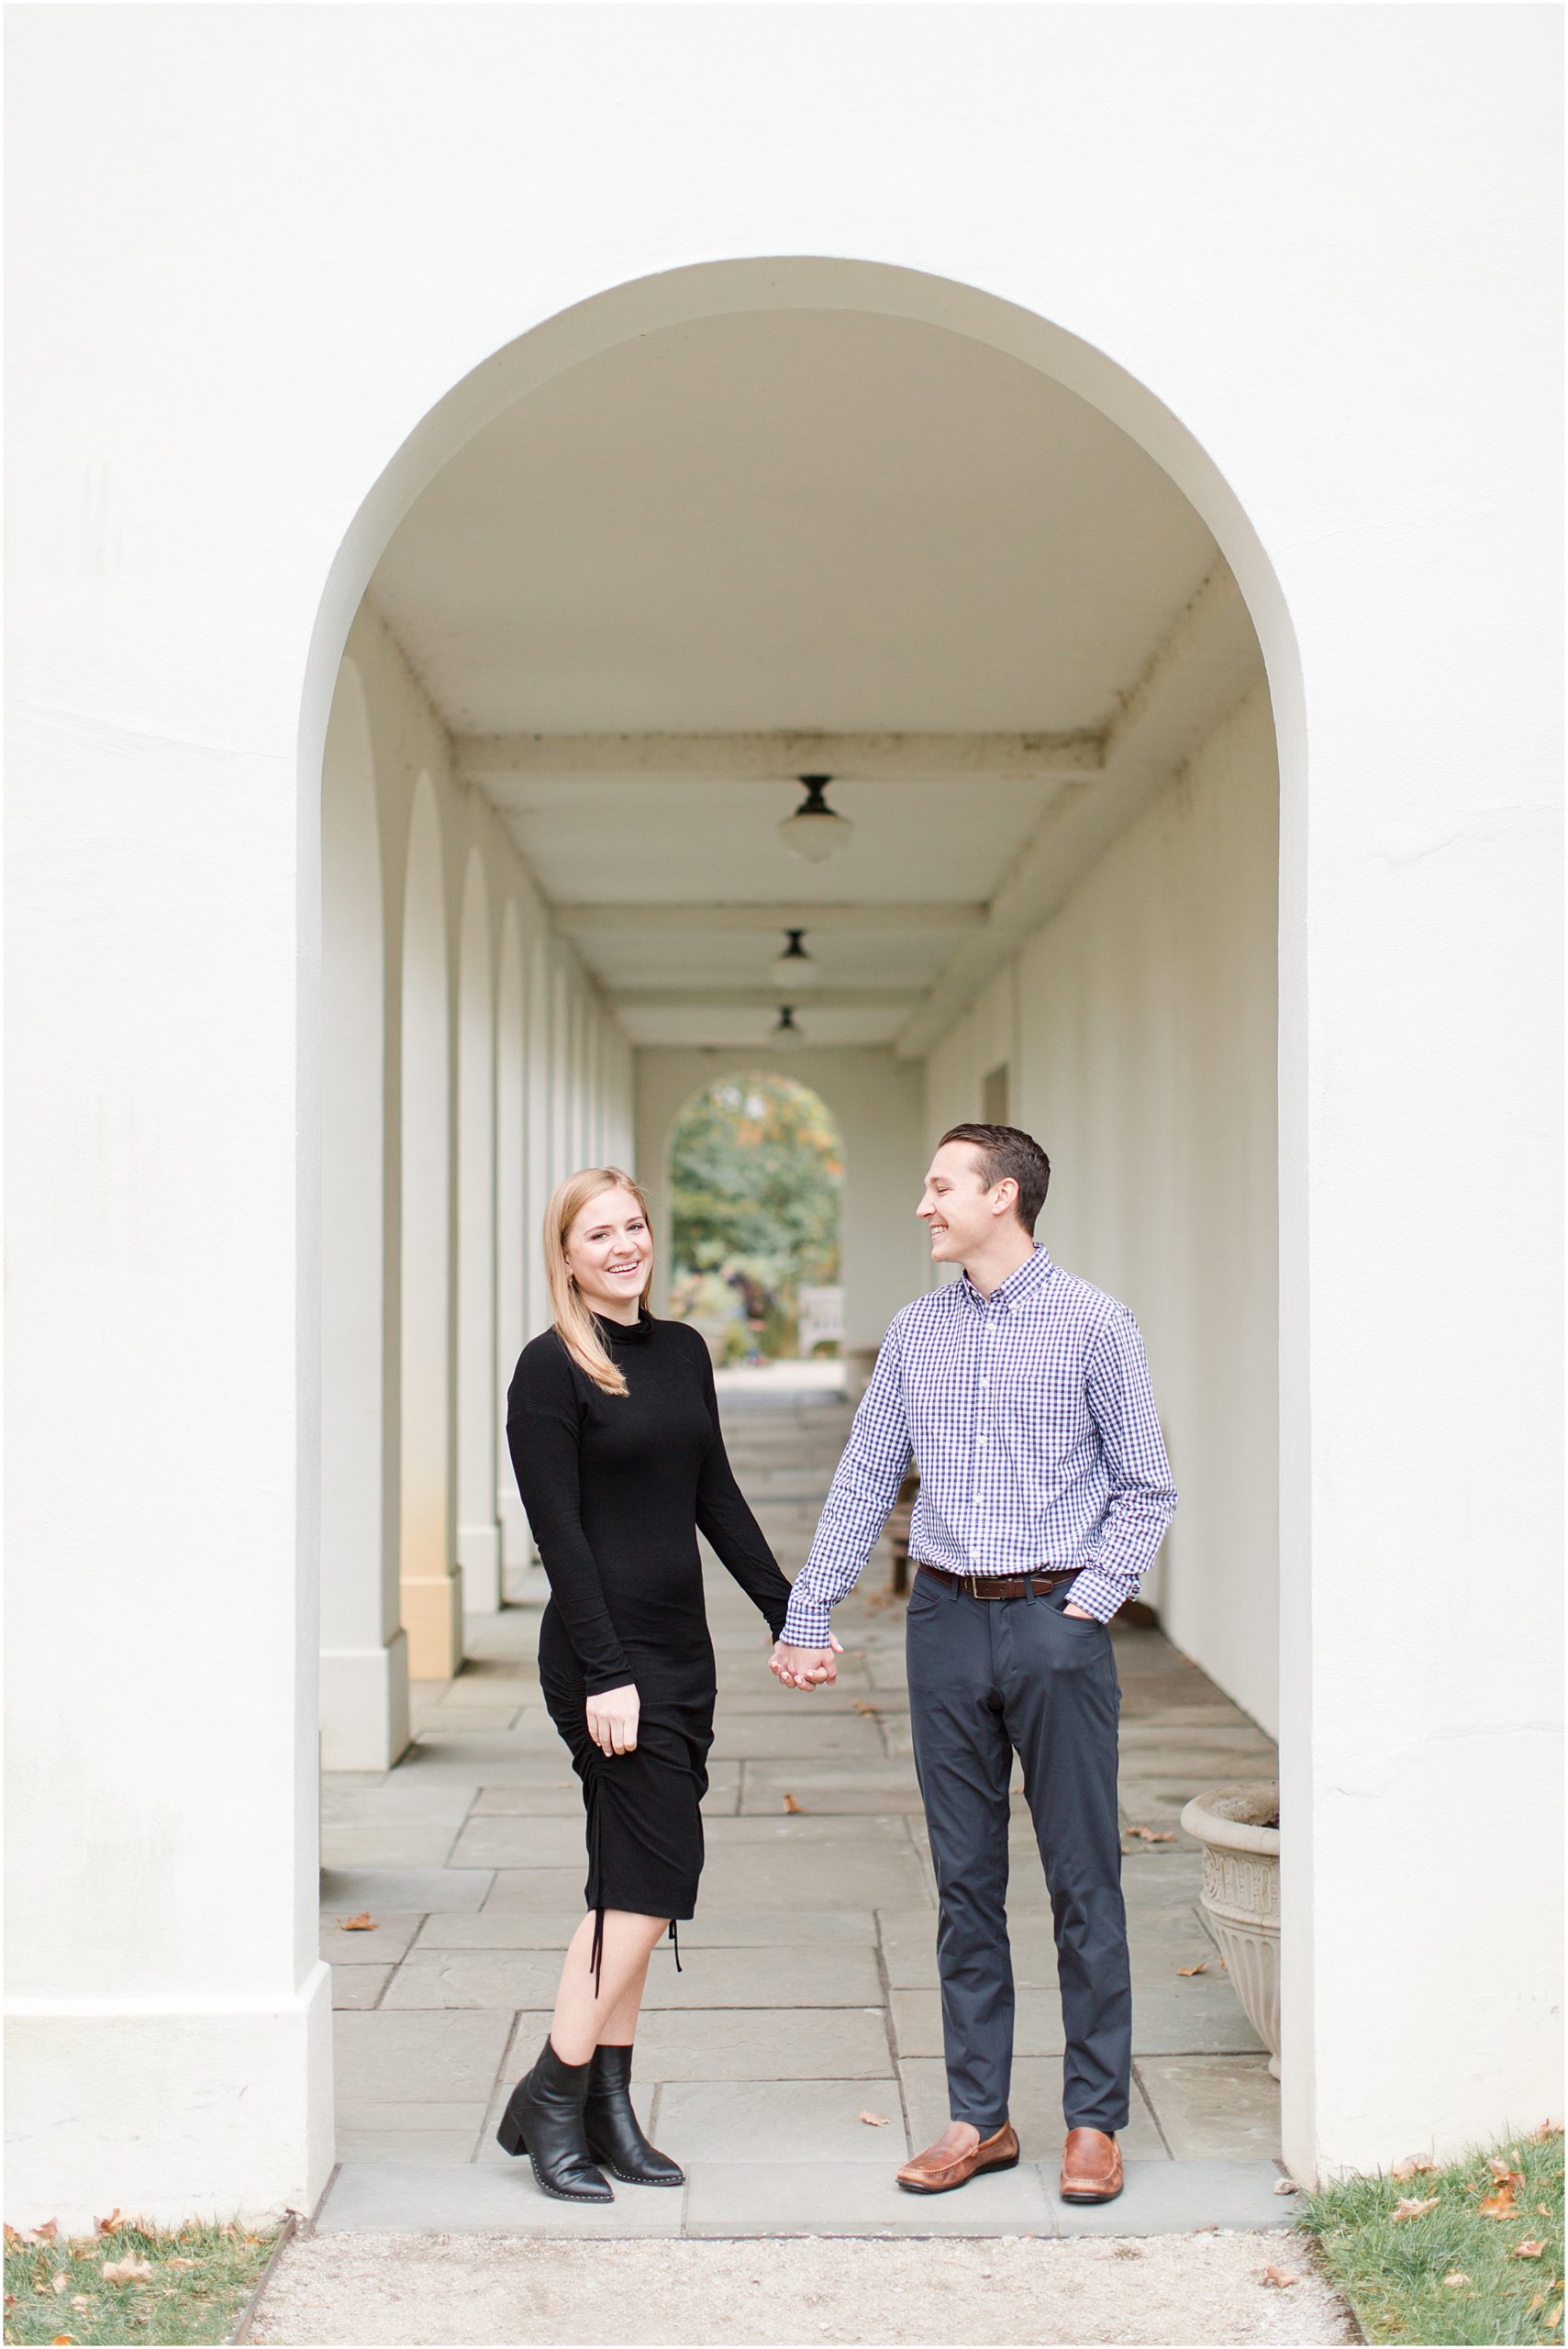 Autumn Newfields Engagement Session_0005.jpg